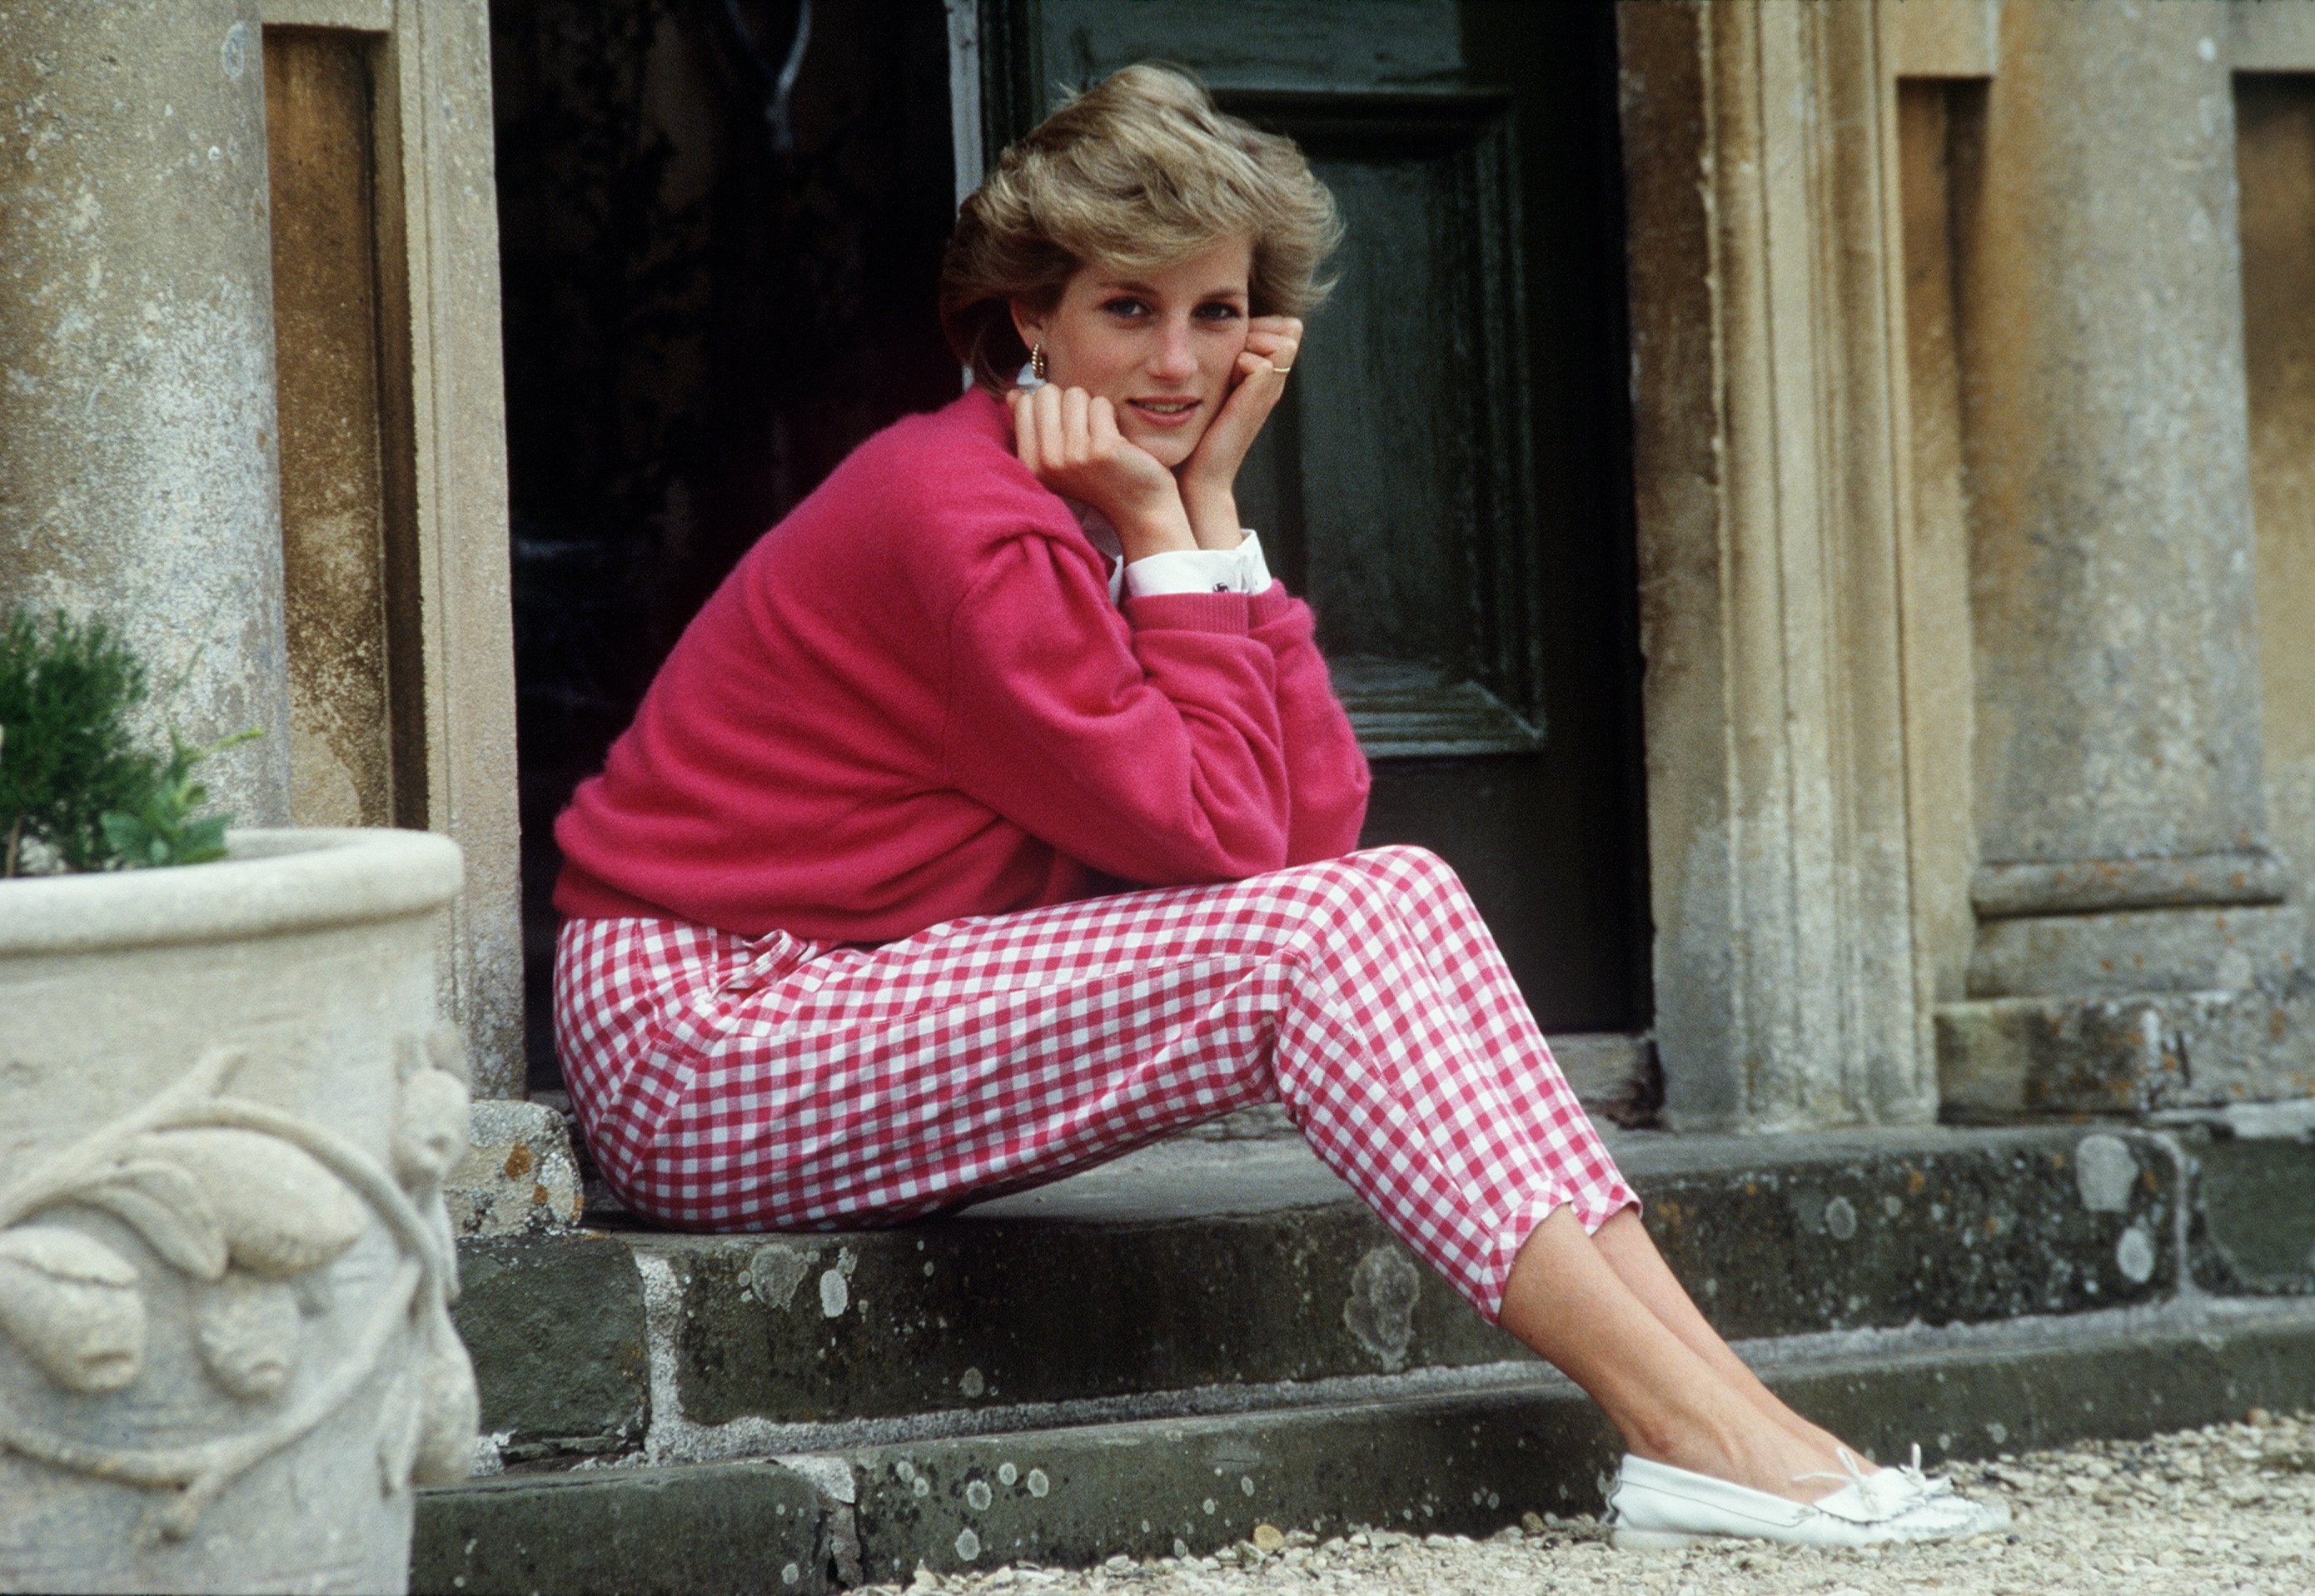 Princess Diana poses with her head on her hands at her Highgrove, Gloucestershire home in Tetbury, UK on July 18, 1986 | Photo: Getty Images